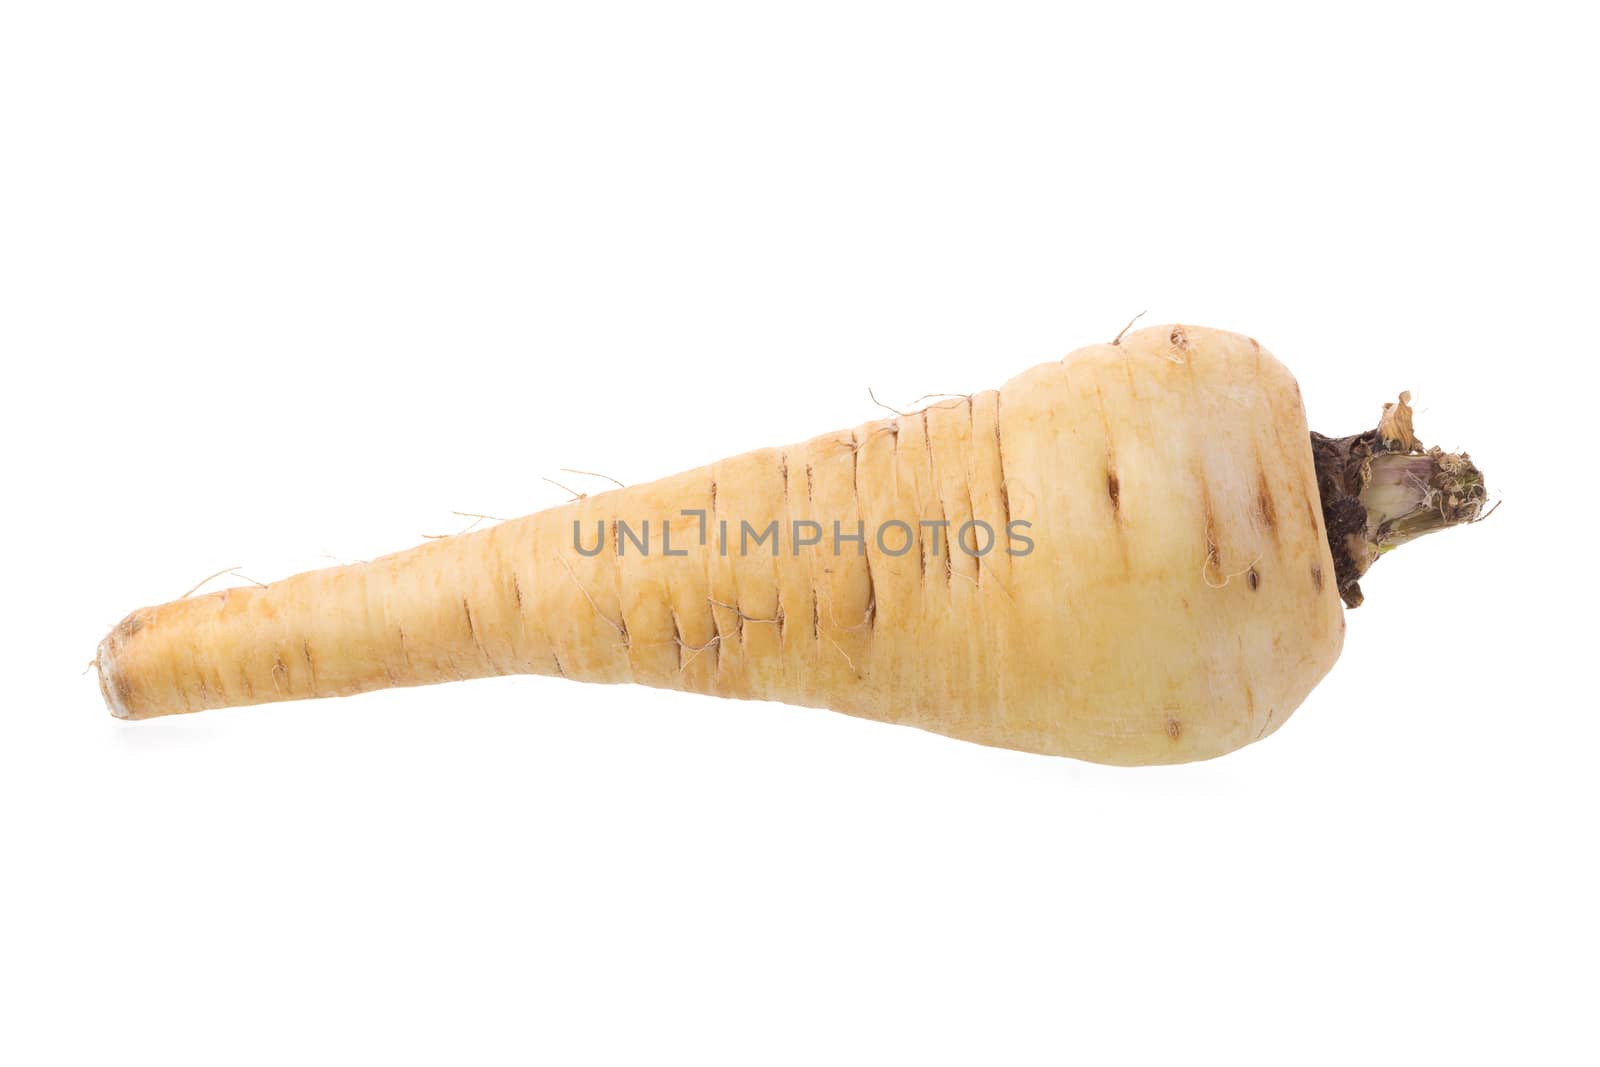 Fresh parsnip roots on a white background.